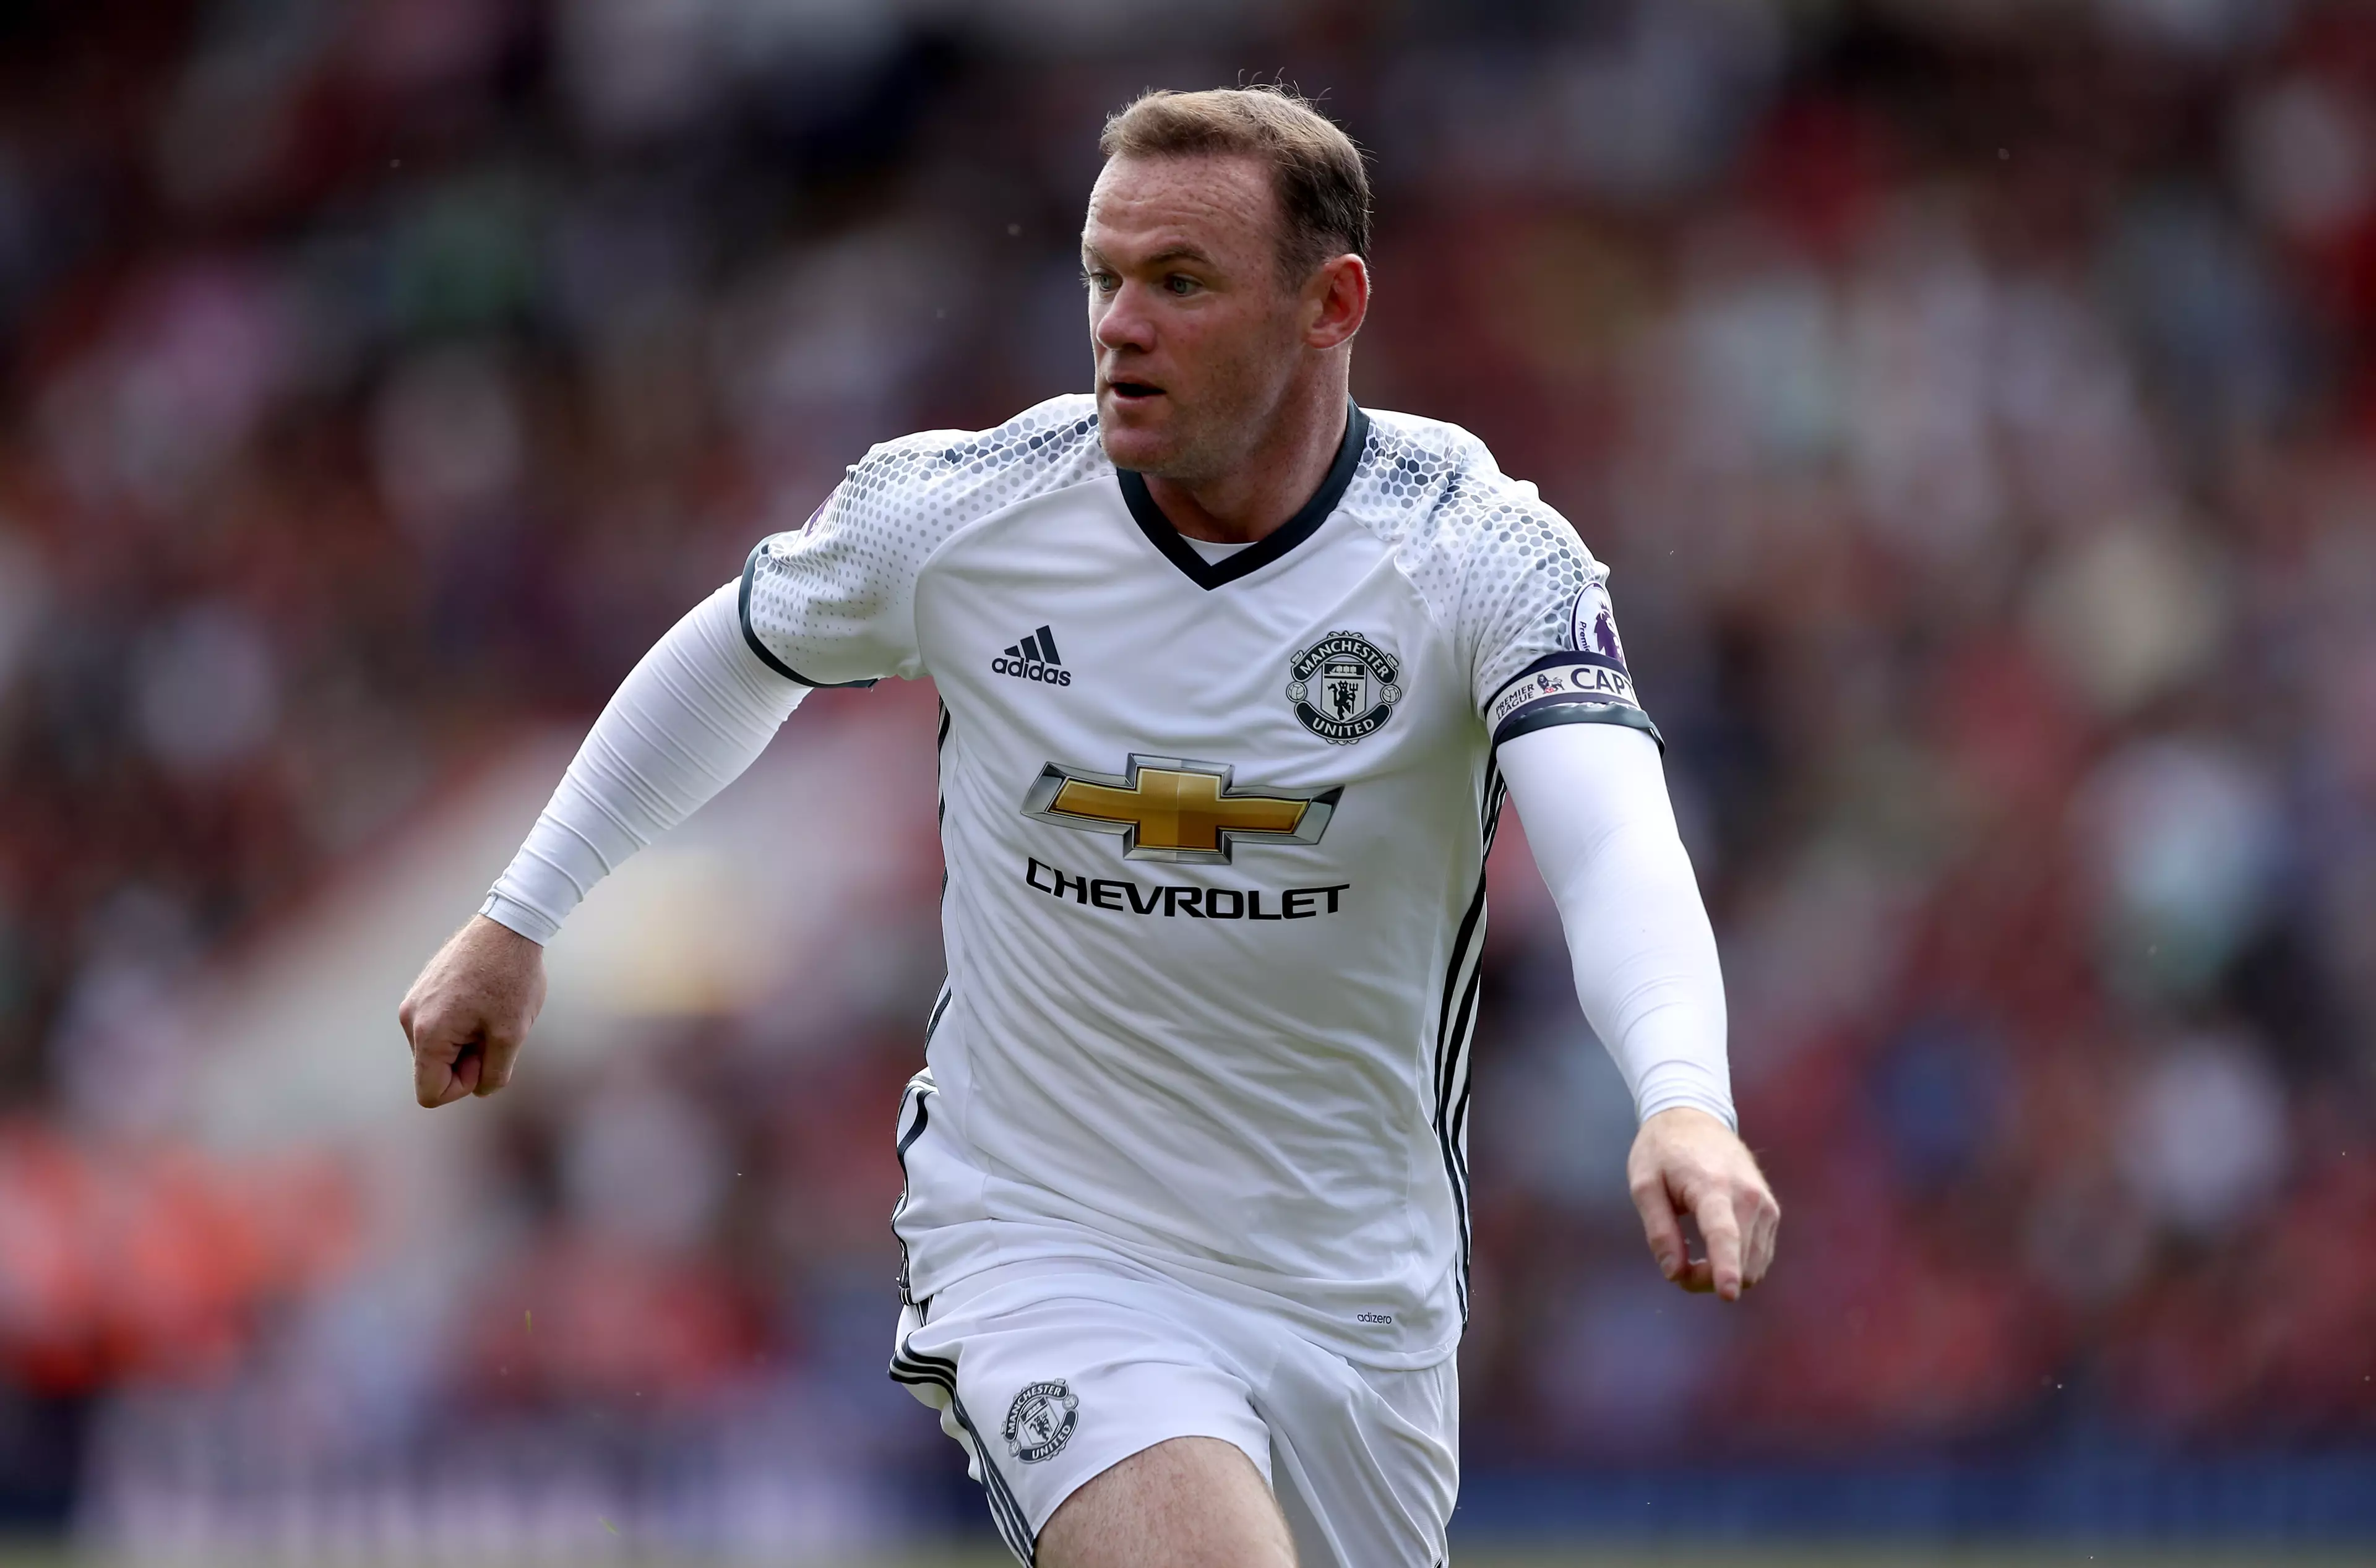 United last wore a white kit back in 2016, Wayne Rooney's last season at the club. (Image